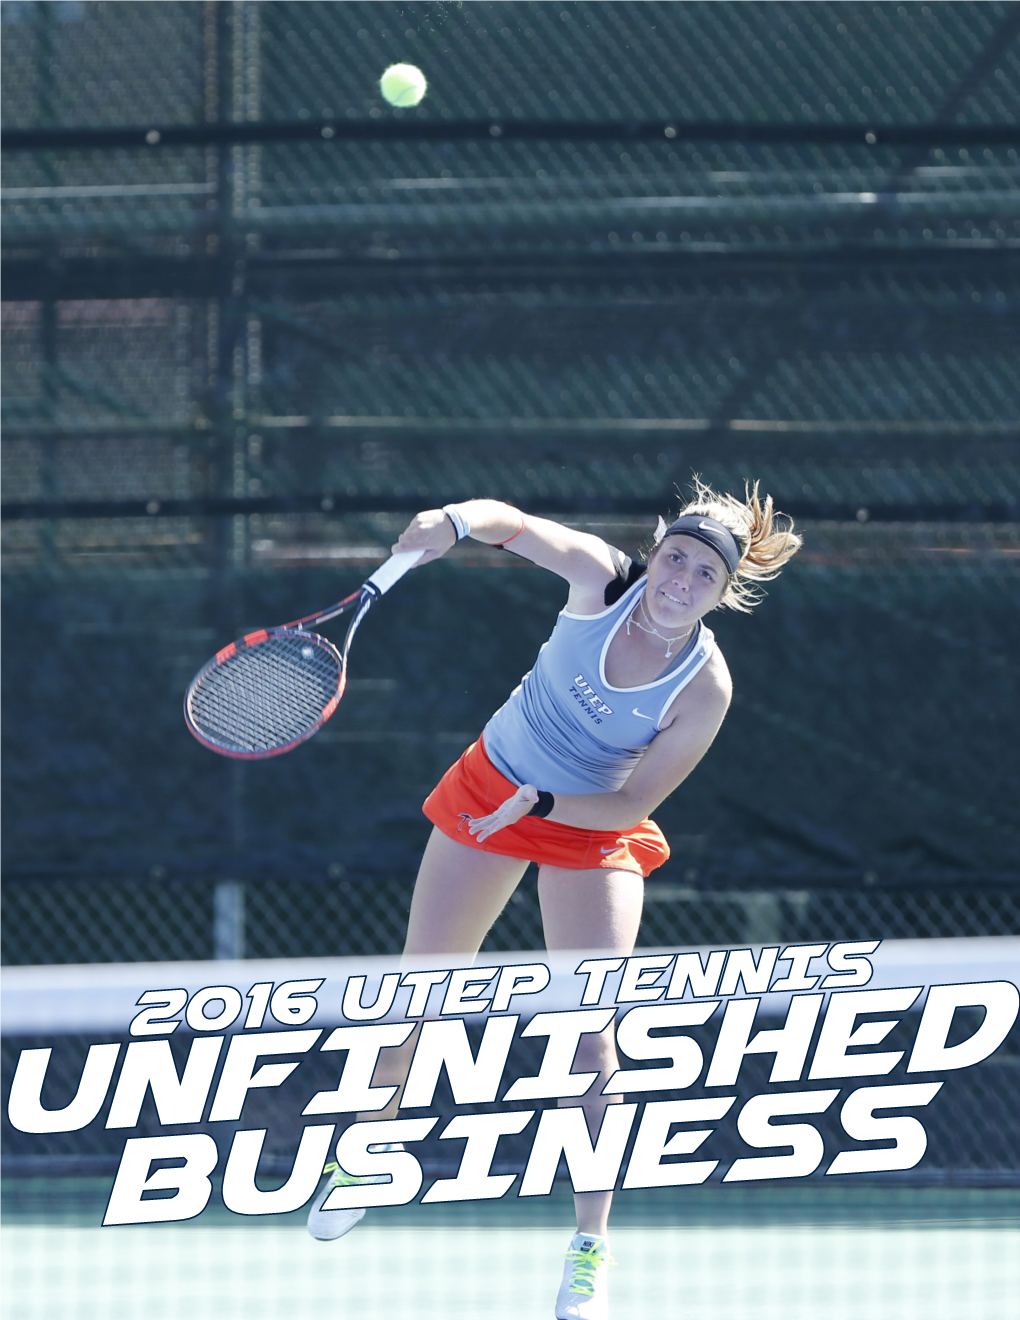 2016 Utep Tennis Business Table of Contents